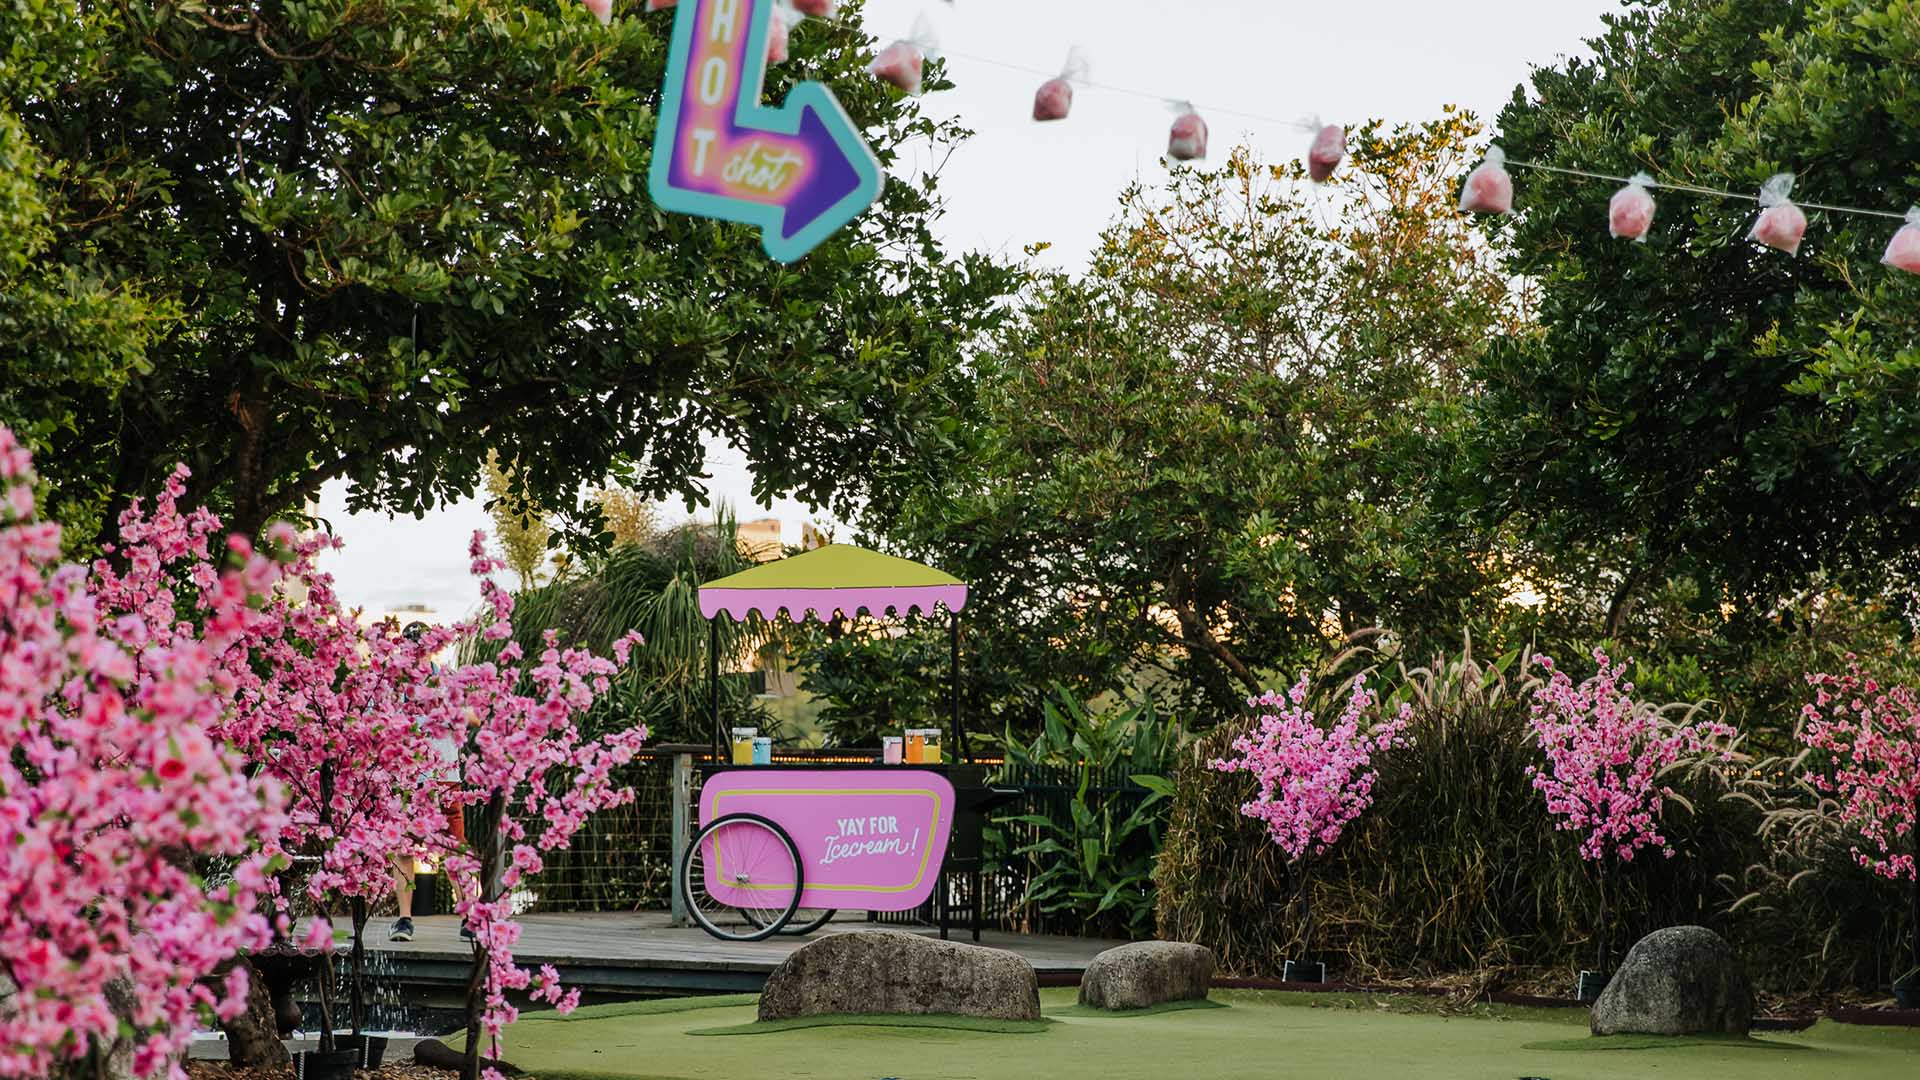 Sweet News: Victoria Park Is Bringing Back Its Candy-Themed Mini Golf Course This Easter